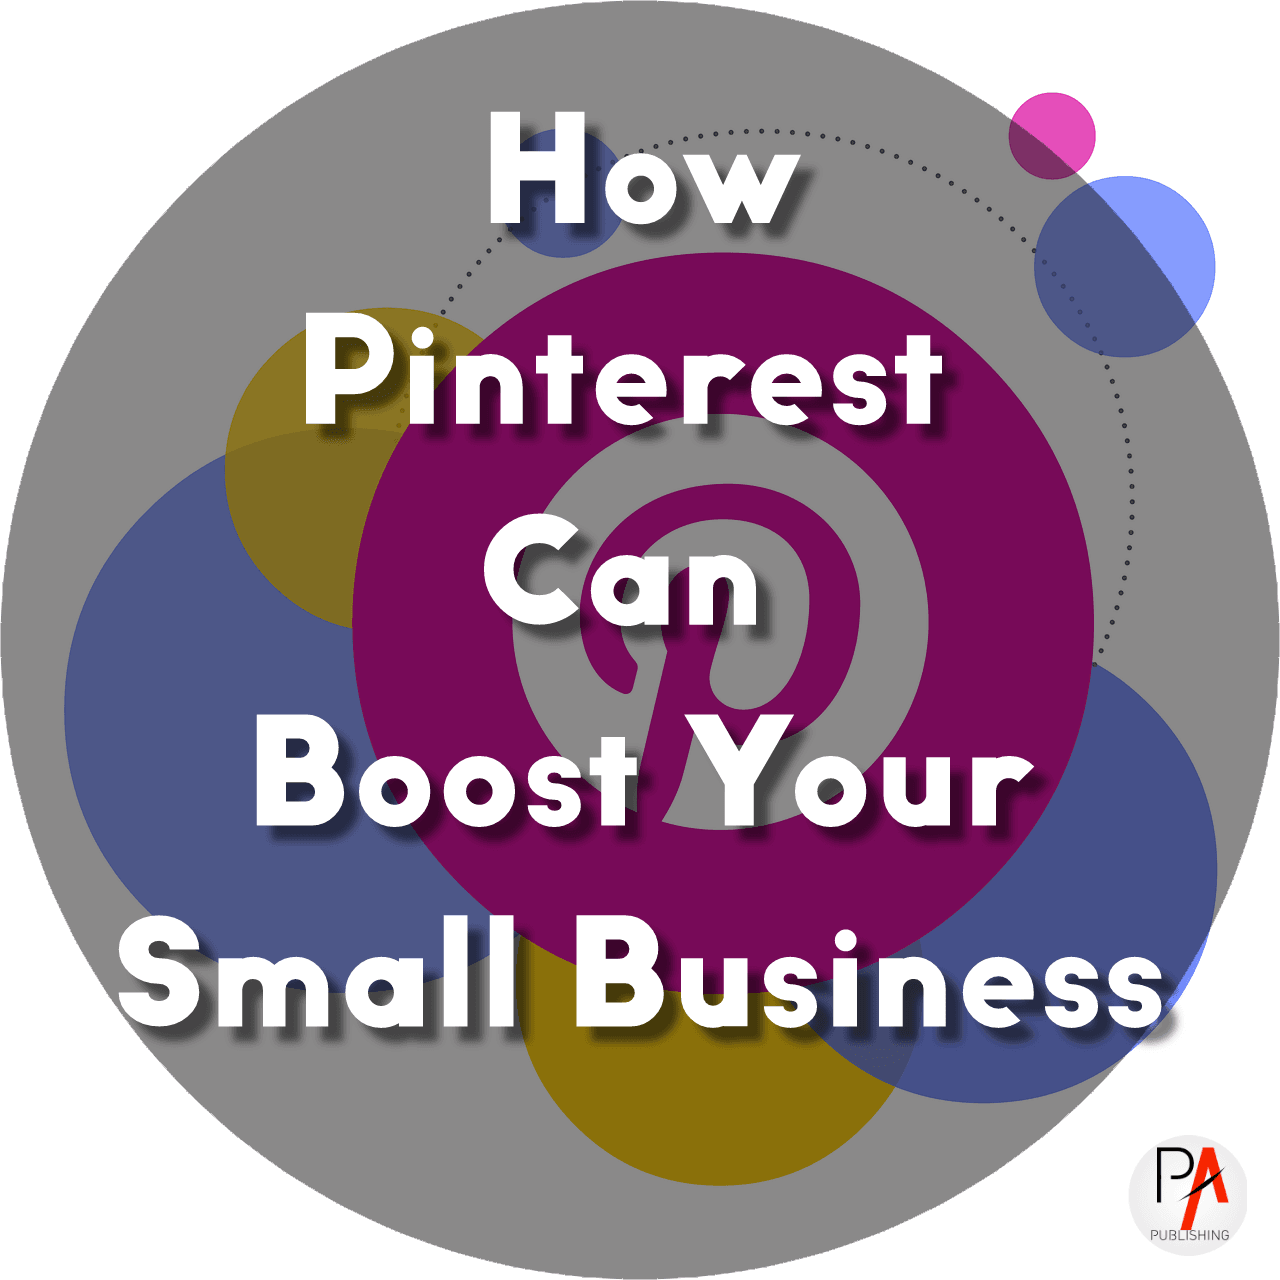 Pinning for Profit: How Pinterest Can Boost Your Small Business